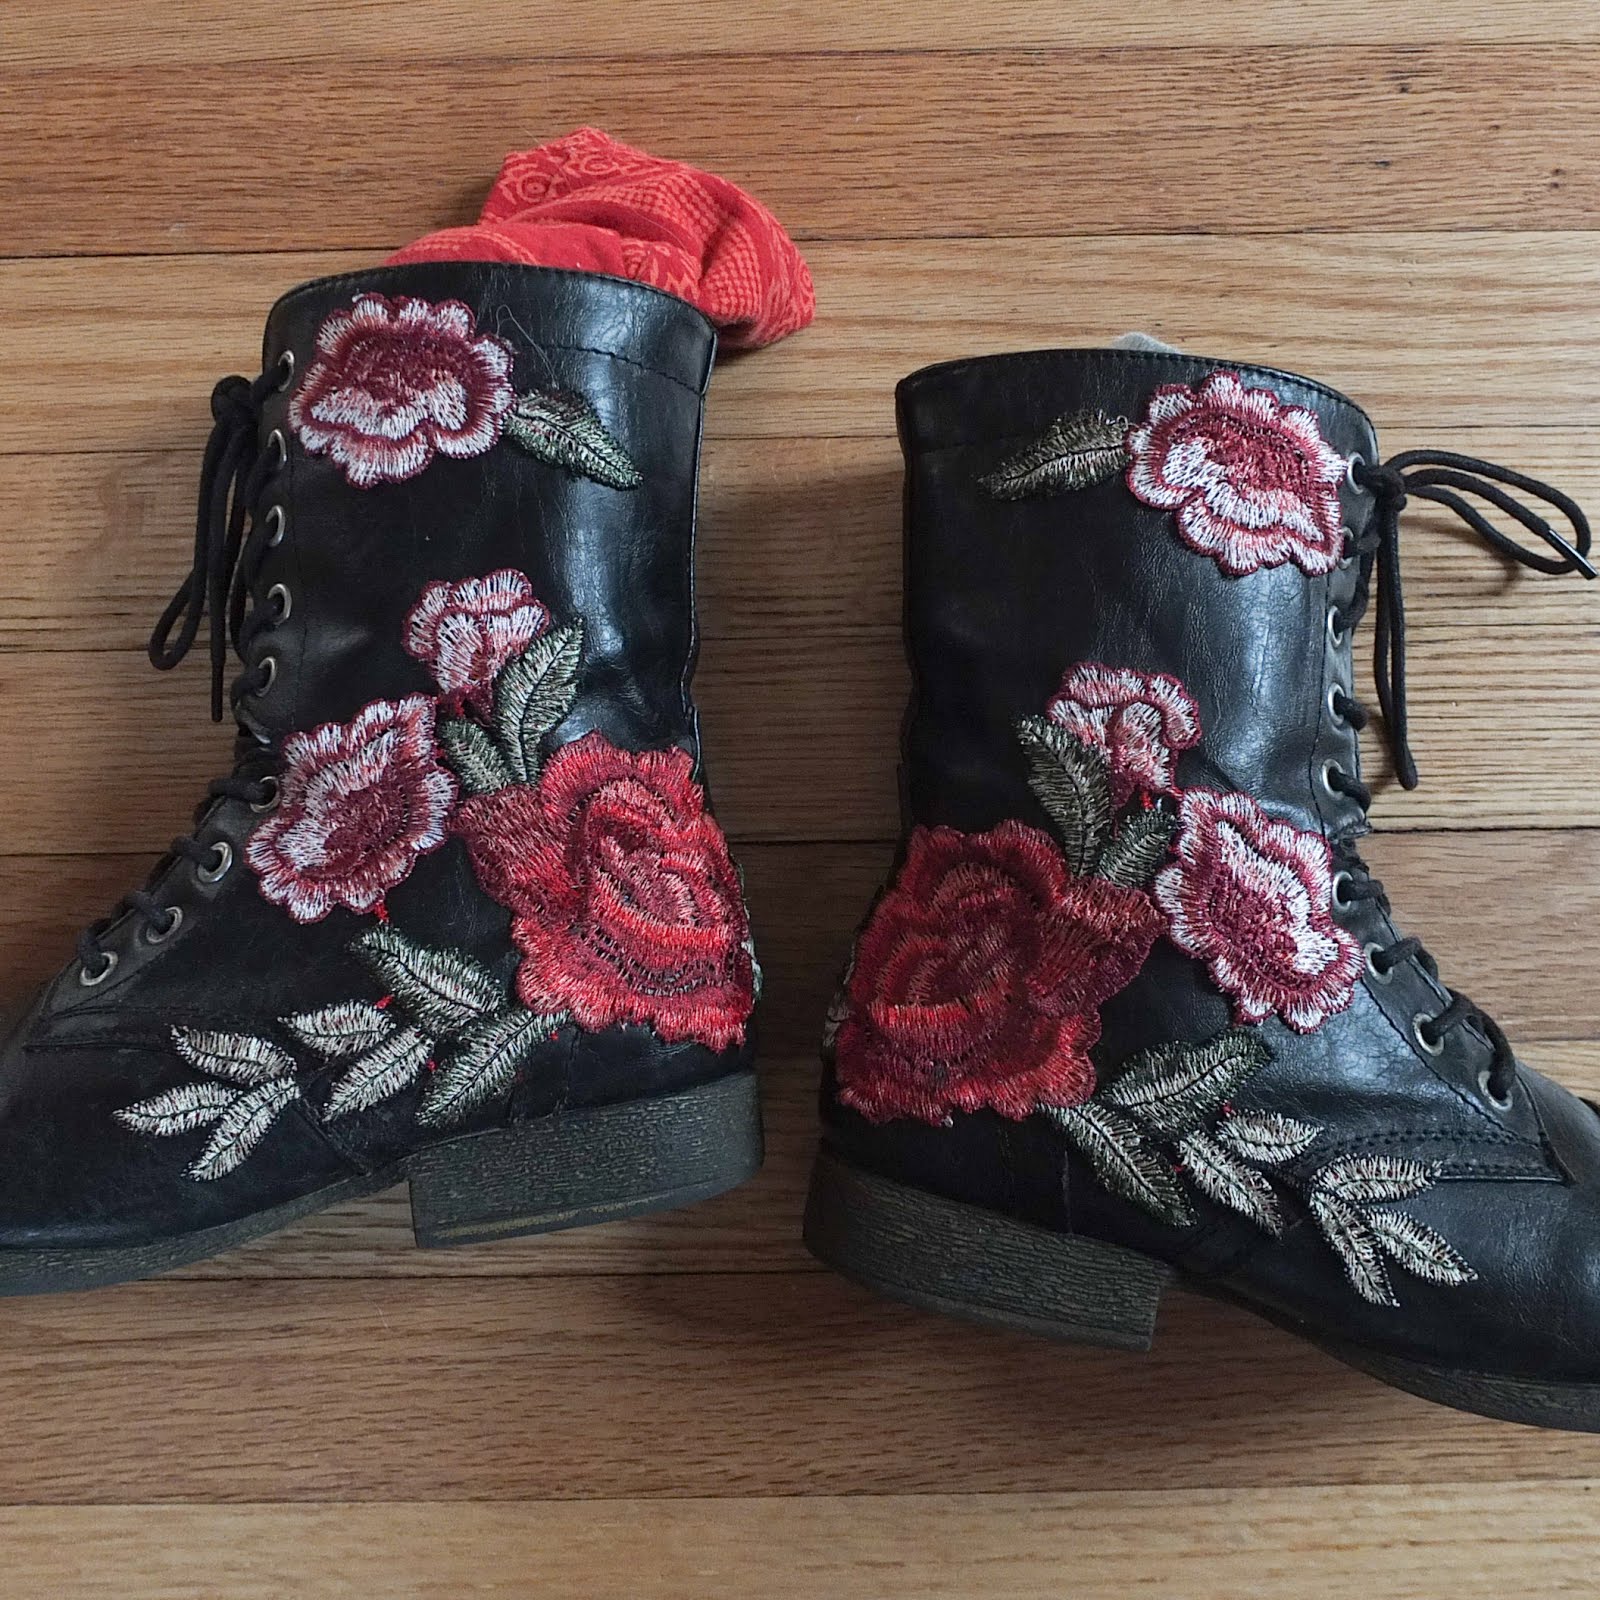 The Unfashionista: Embroidered boots